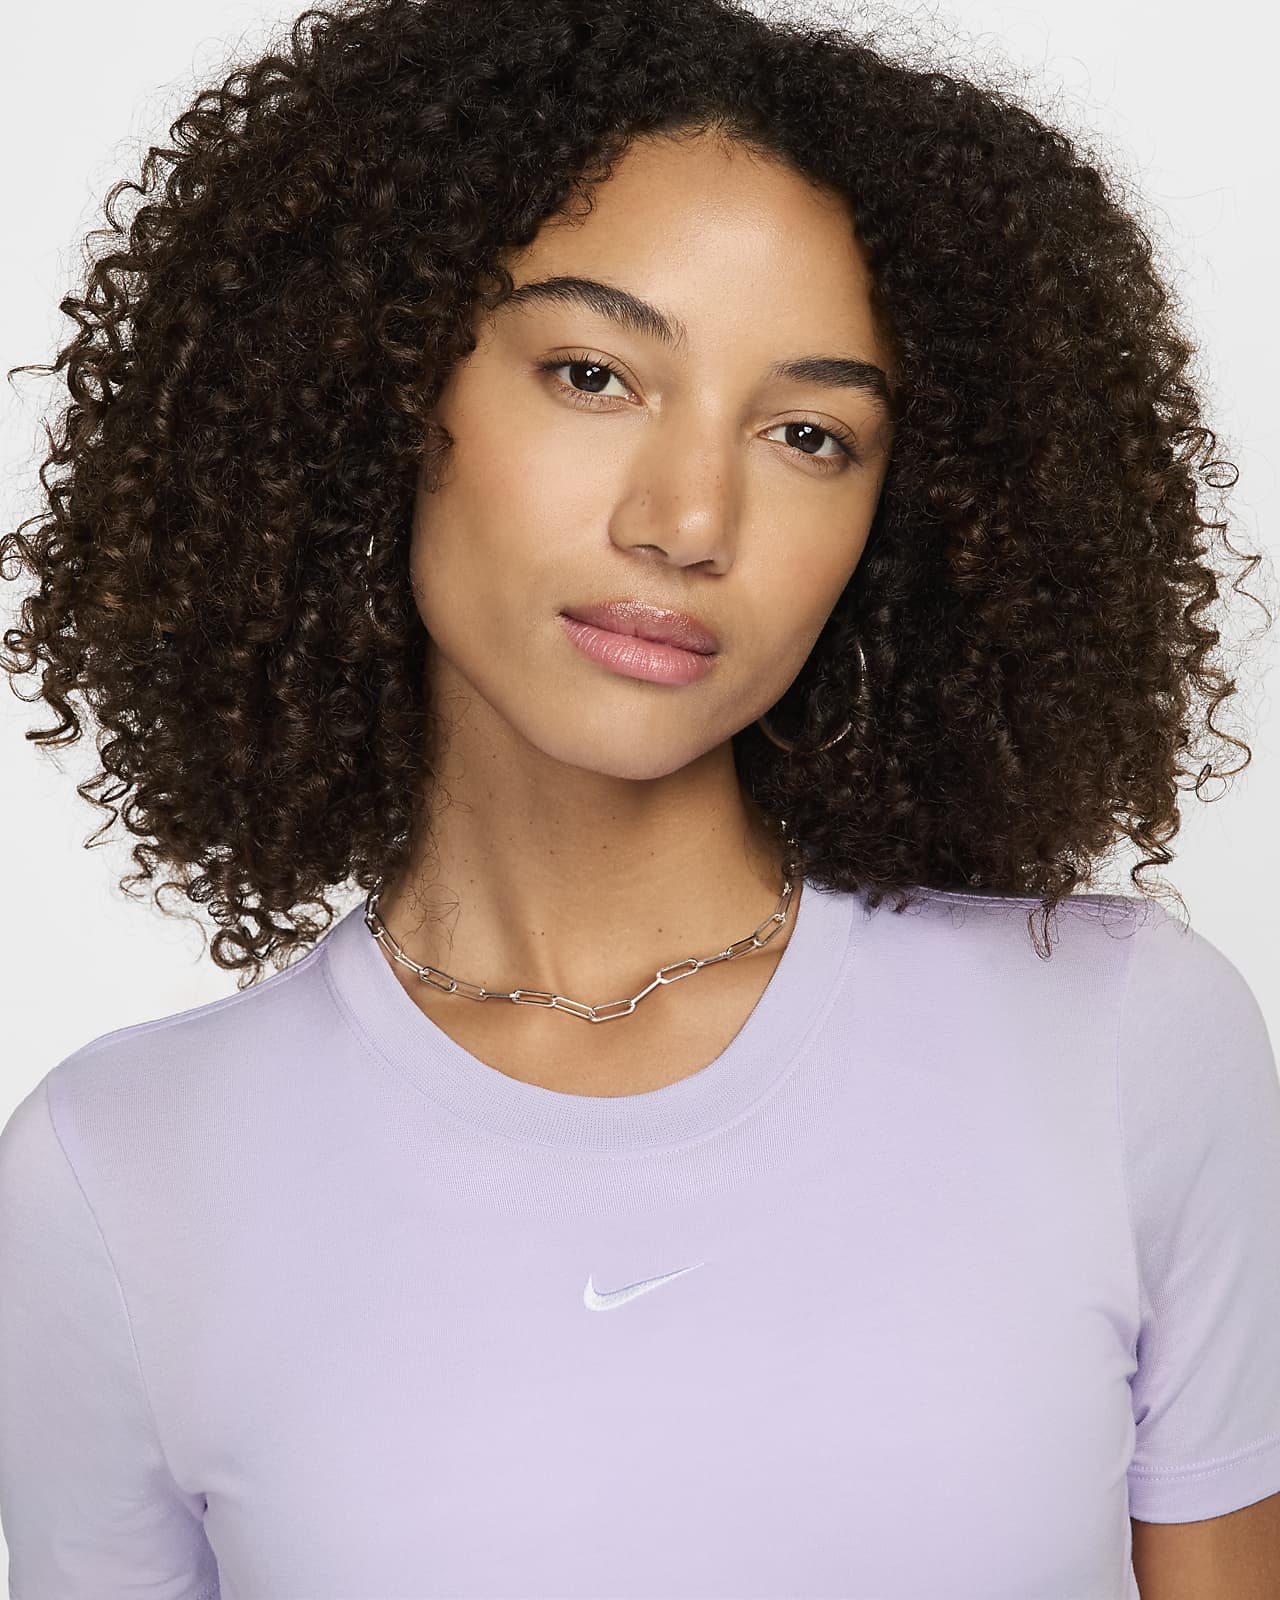  Nike Women's All-in Crop, Black/White, X-Small : Clothing,  Shoes & Jewelry